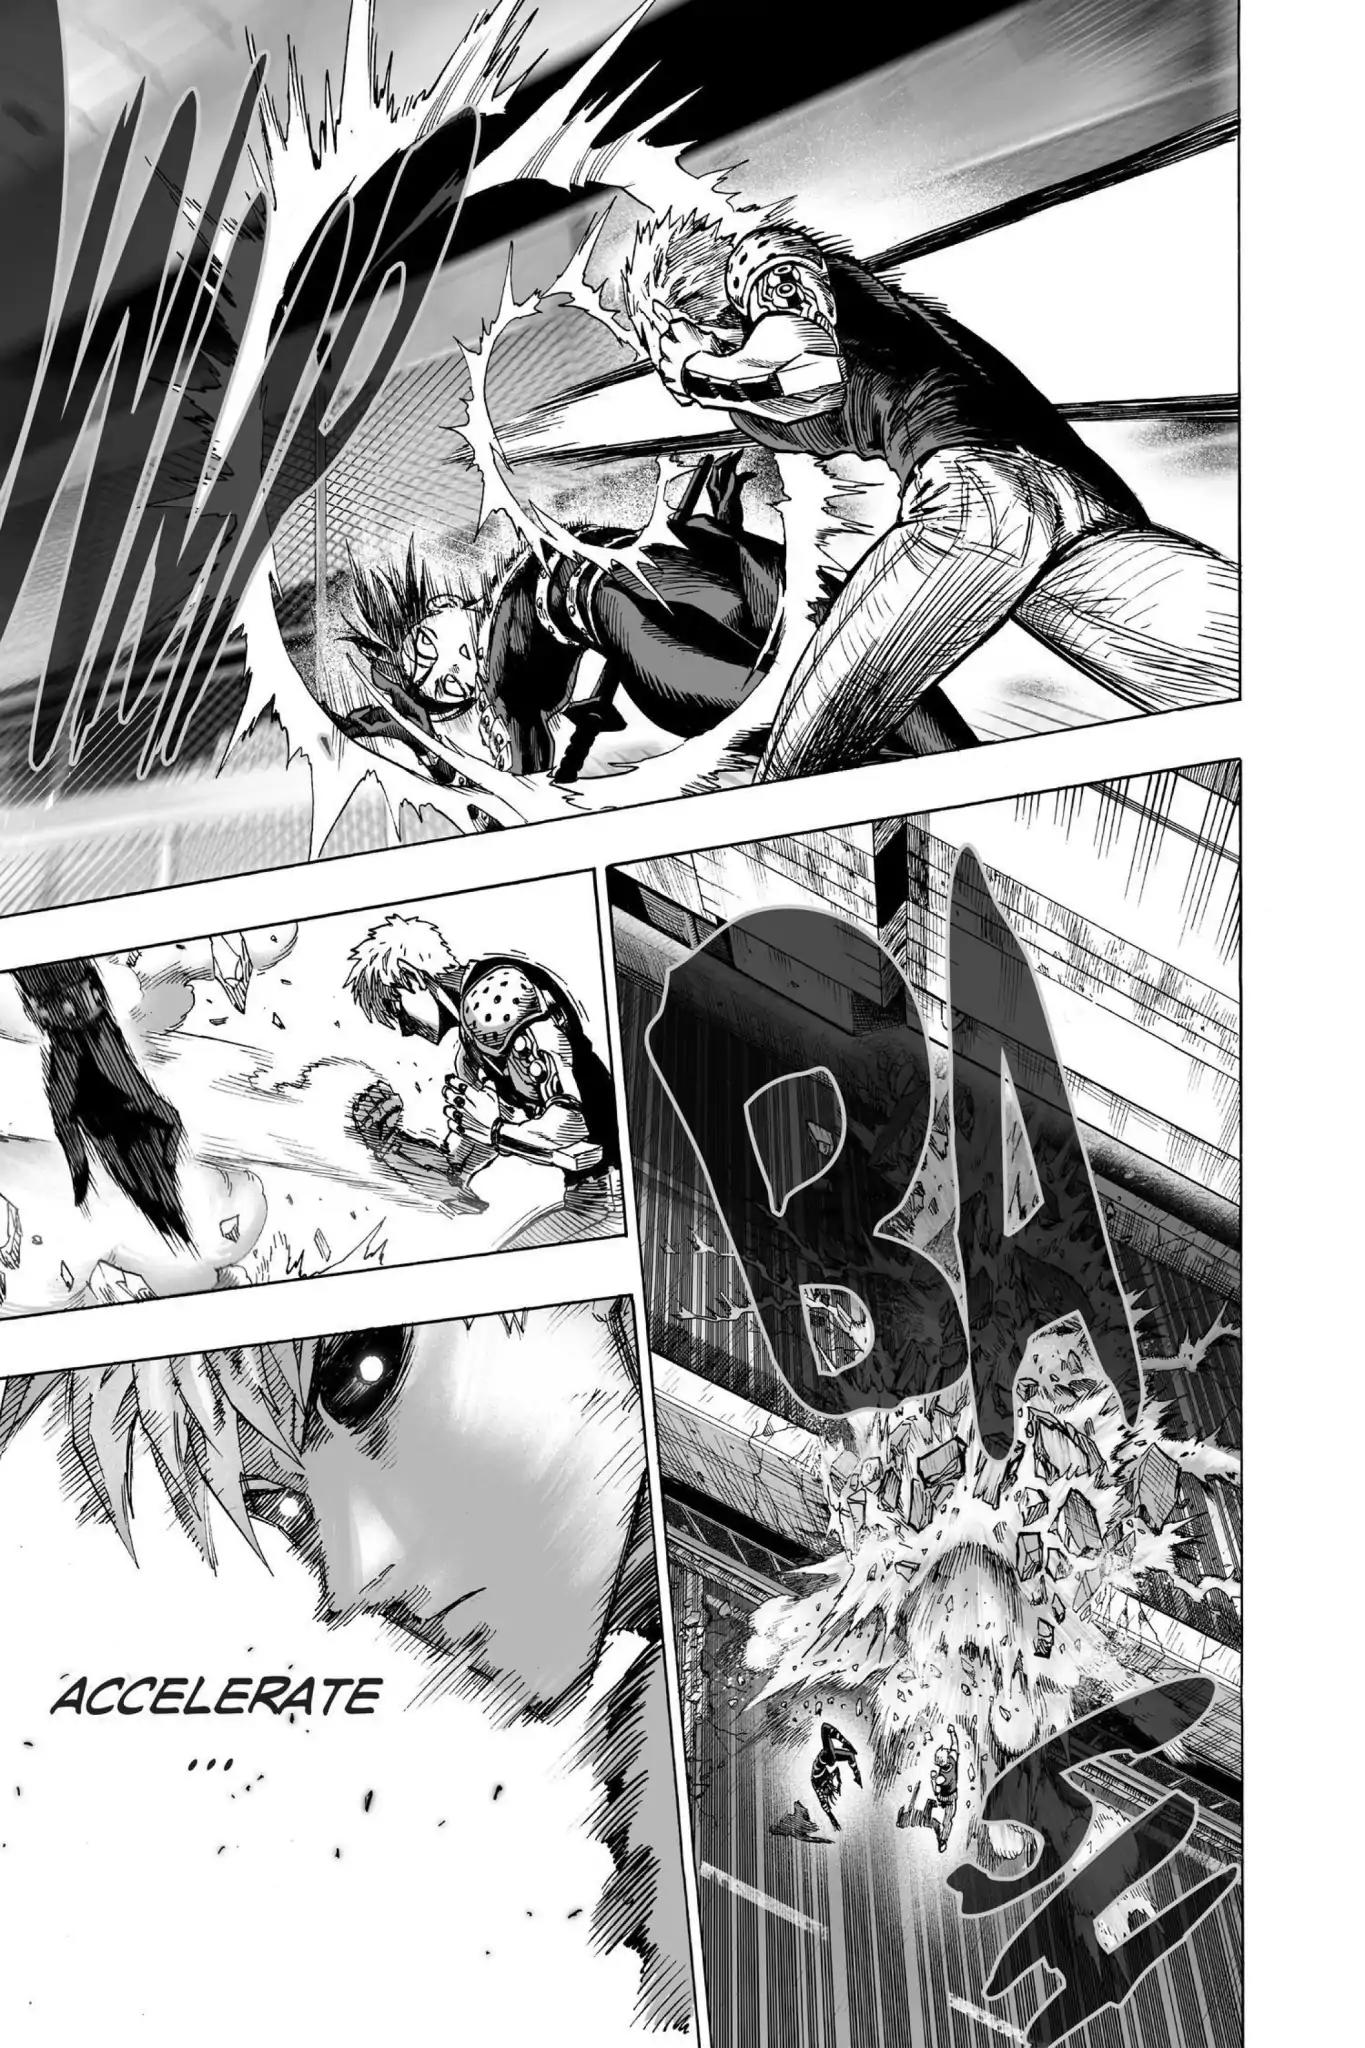 One Punch Man, Chapter 44 Accelerate image 08